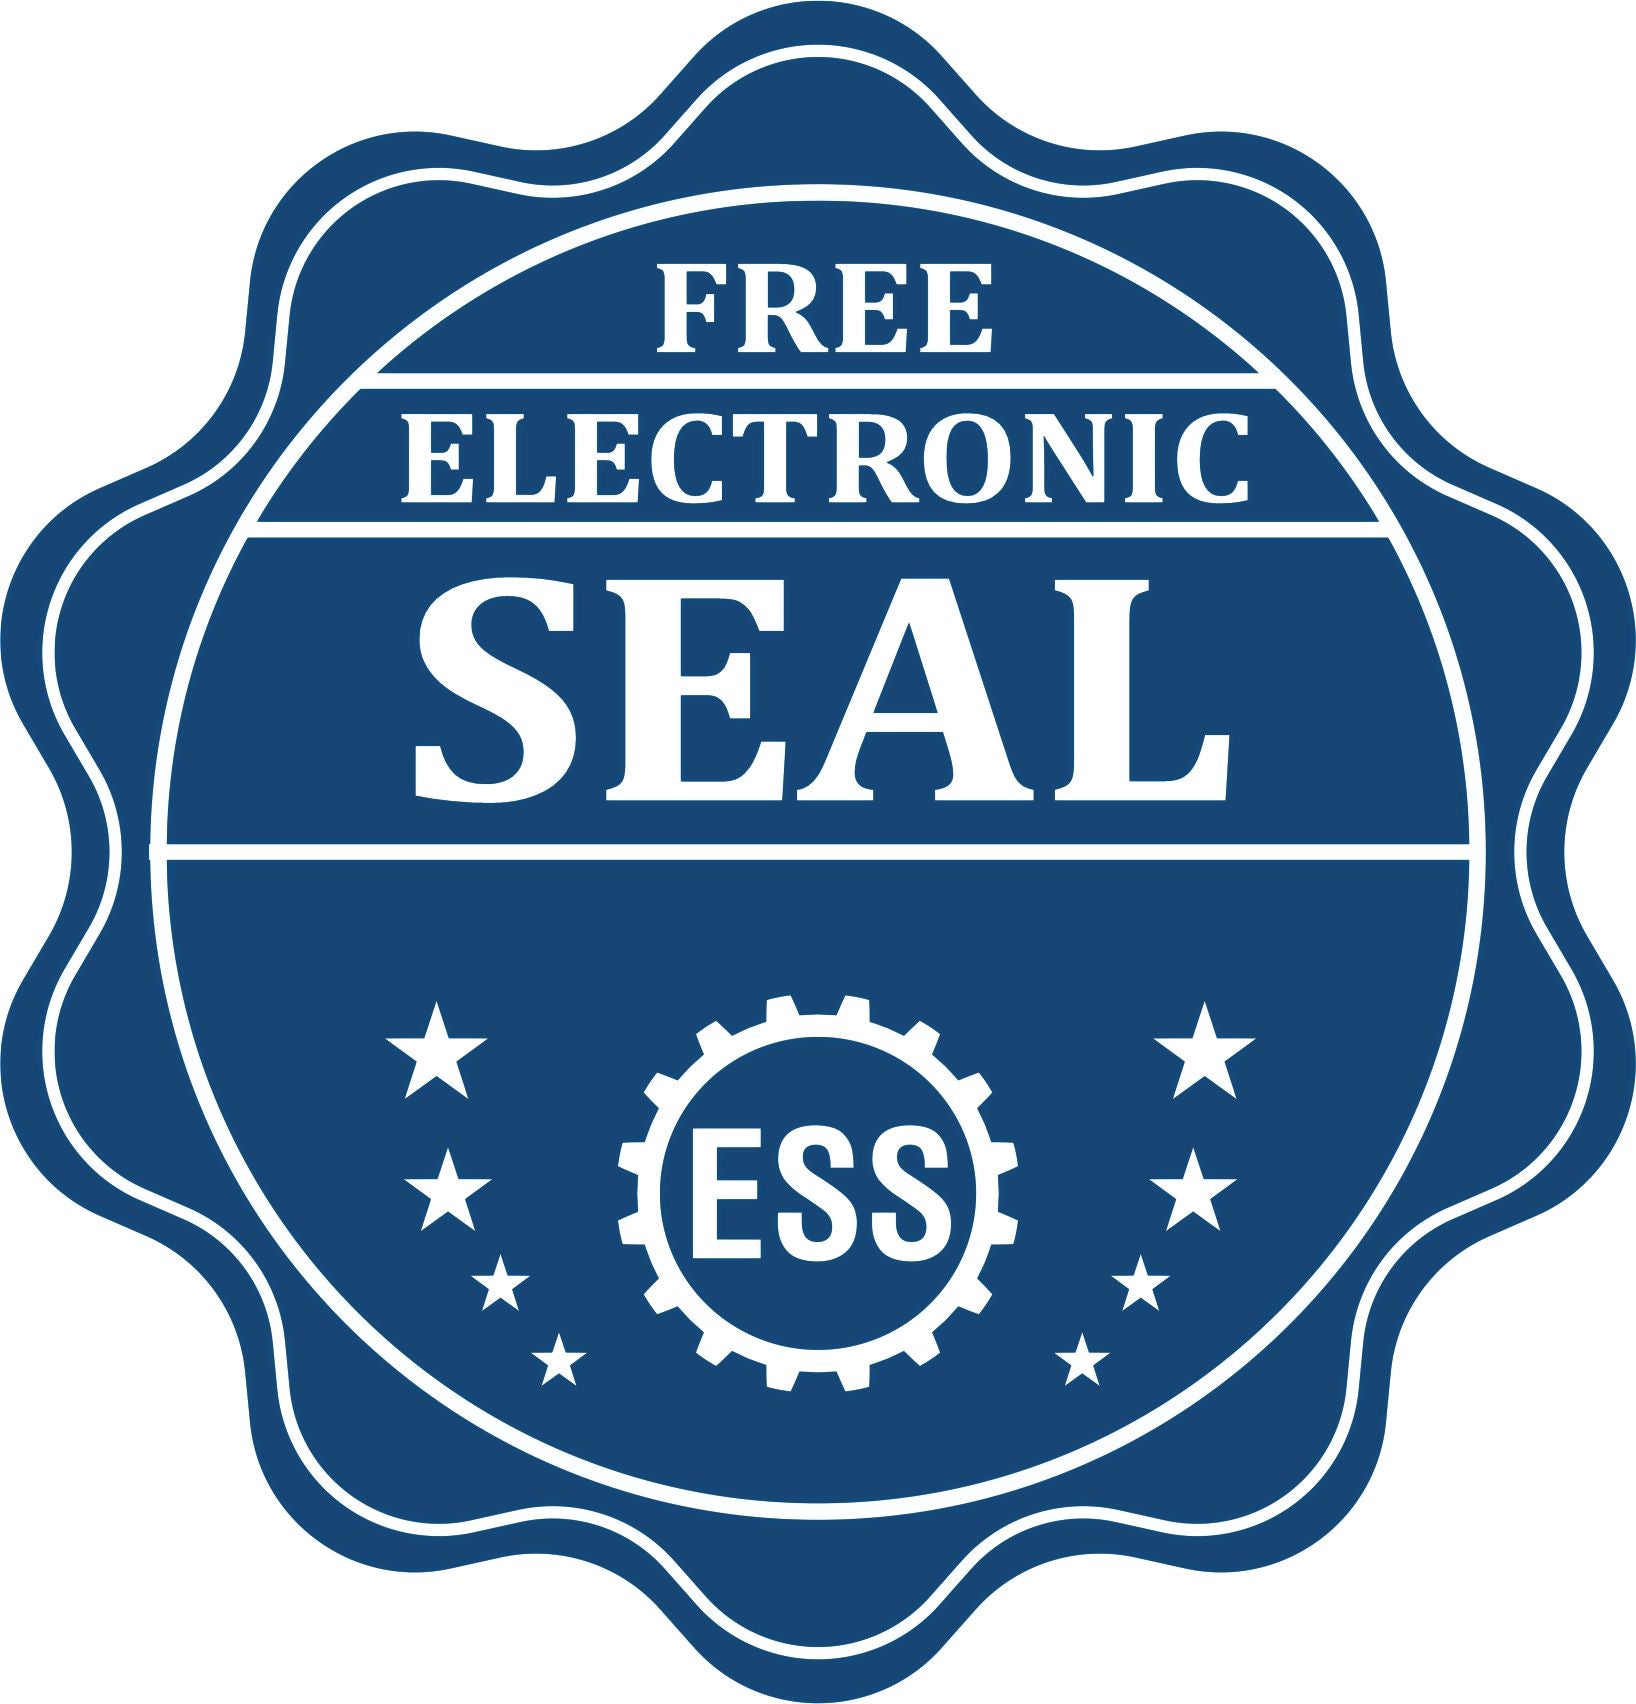 A badge showing a free electronic seal for the State of North Carolina Long Reach Architectural Embossing Seal with stars and the ESS gear on the emblem.